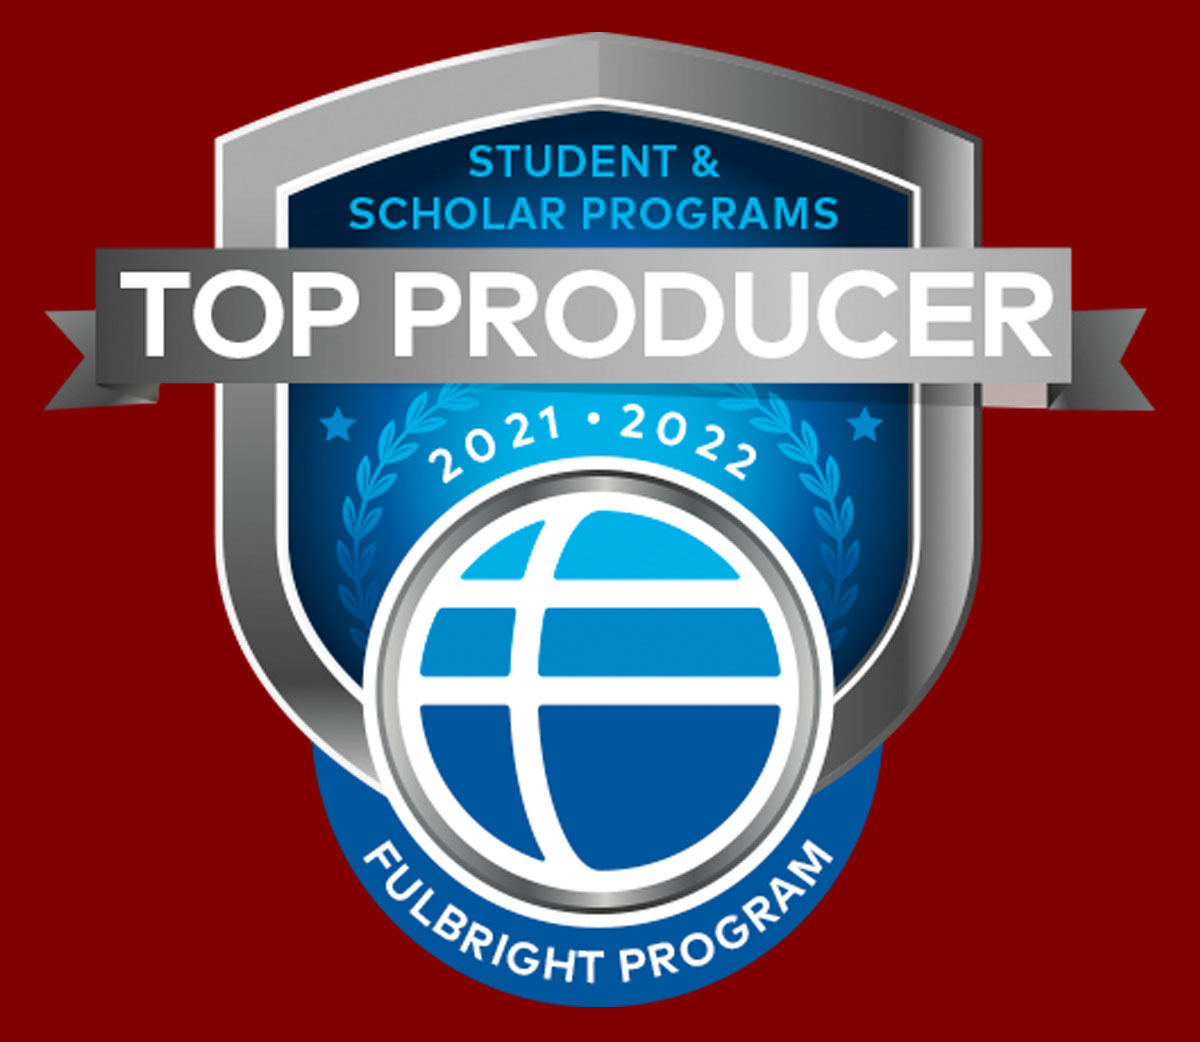 Fulbright Top Producer badge